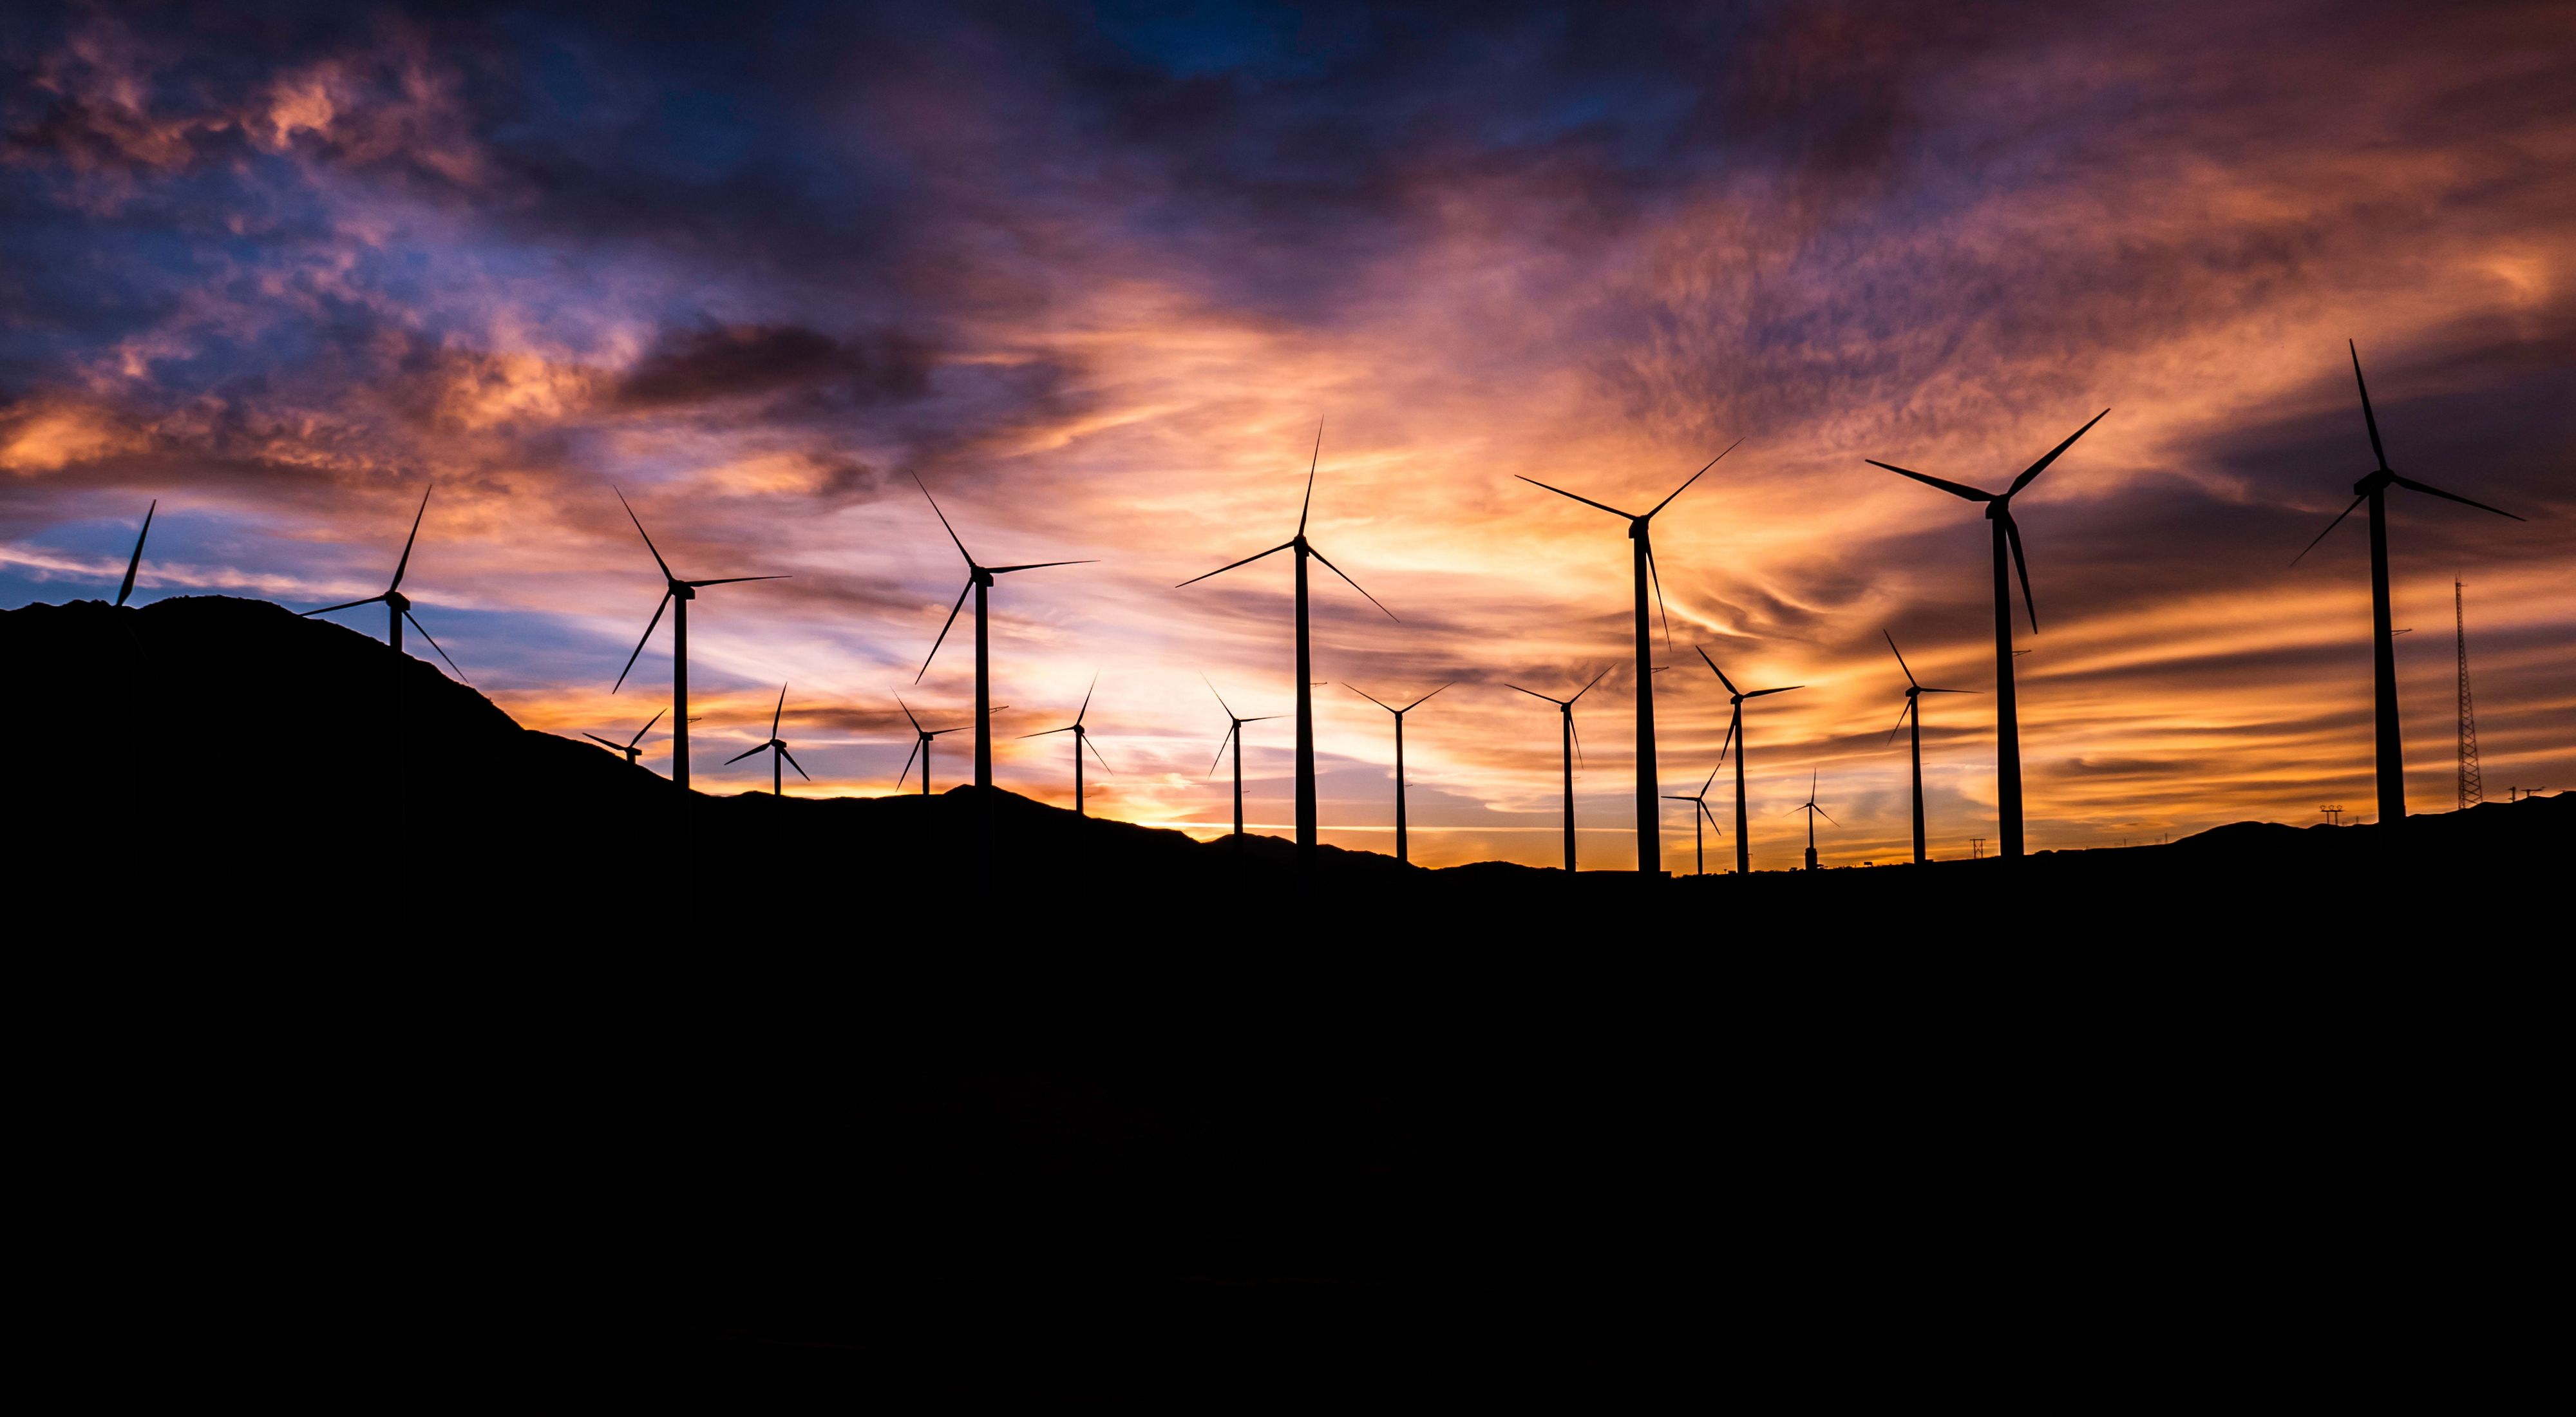 Wind turbines silhouetted against the sky at sunset.